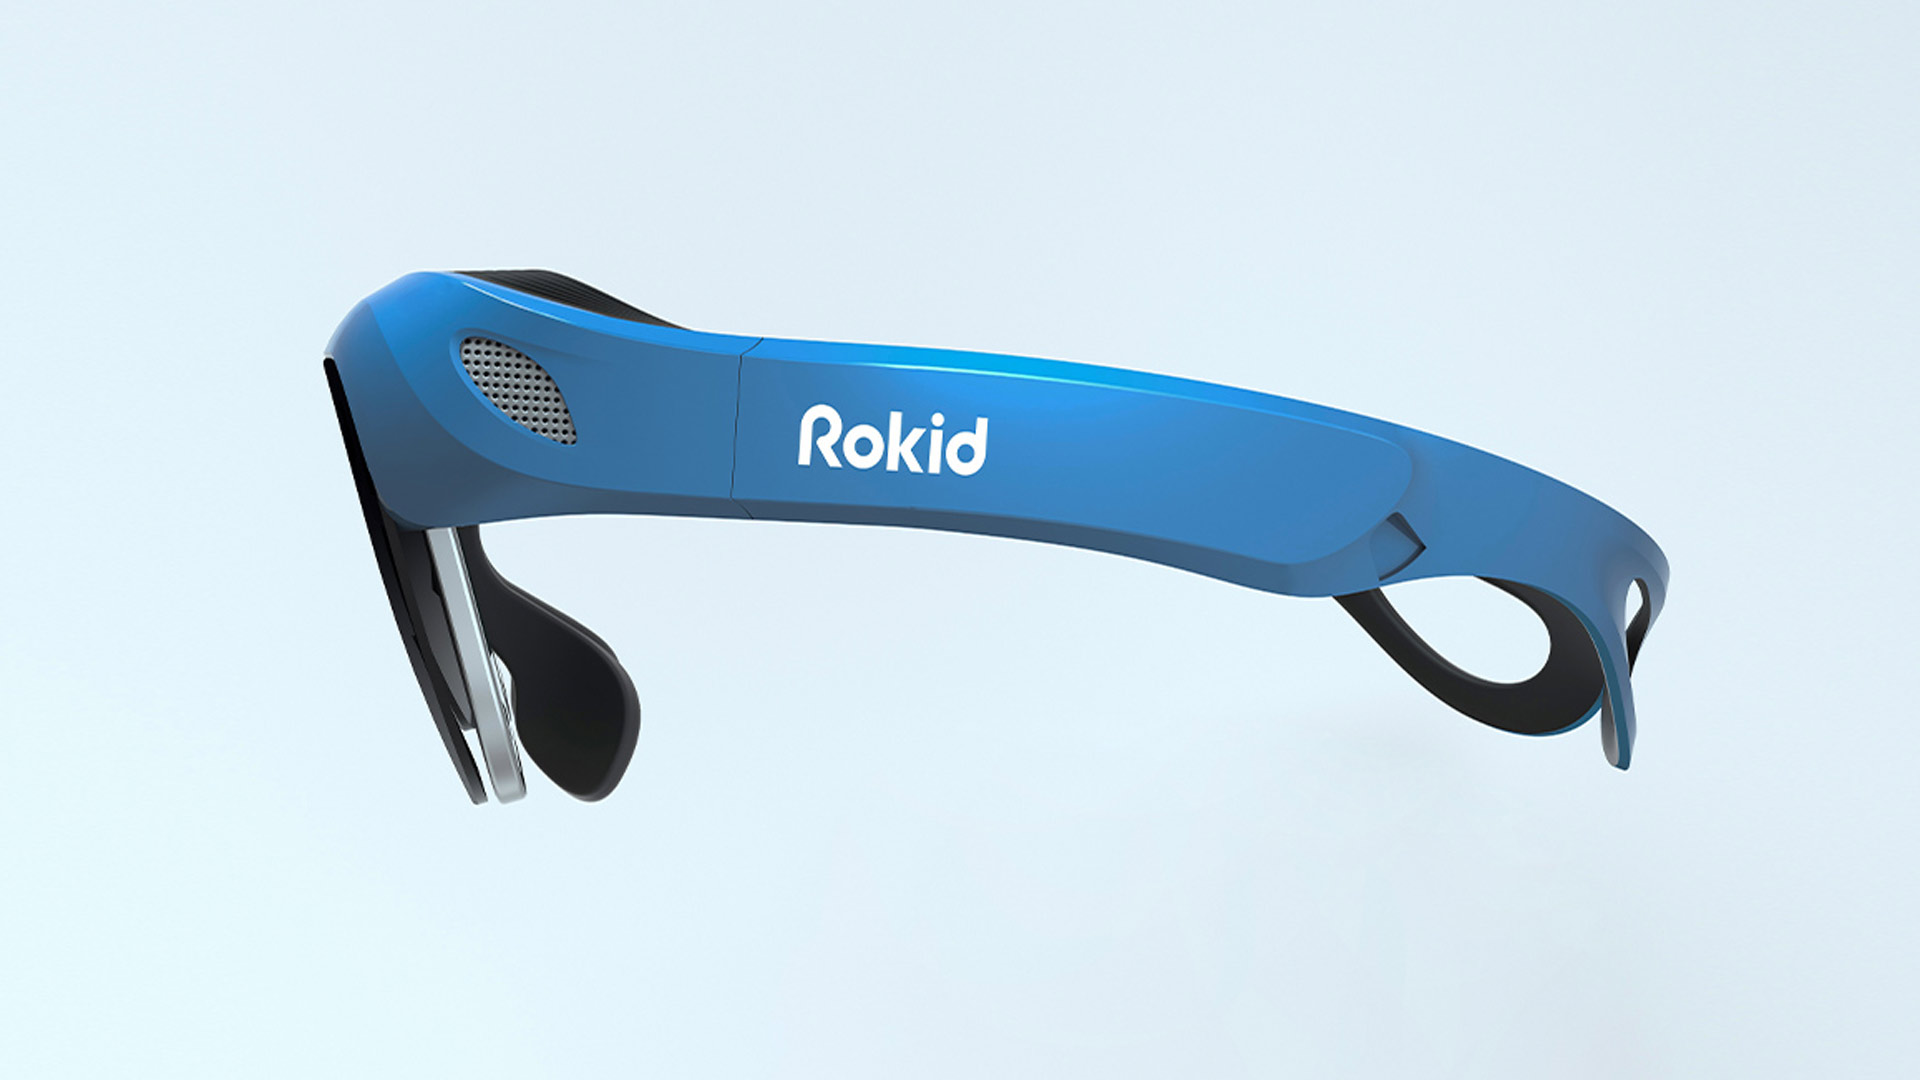 Rokid Reveals Vision 2 AR Headset with Waveguide Optics – Road to VR